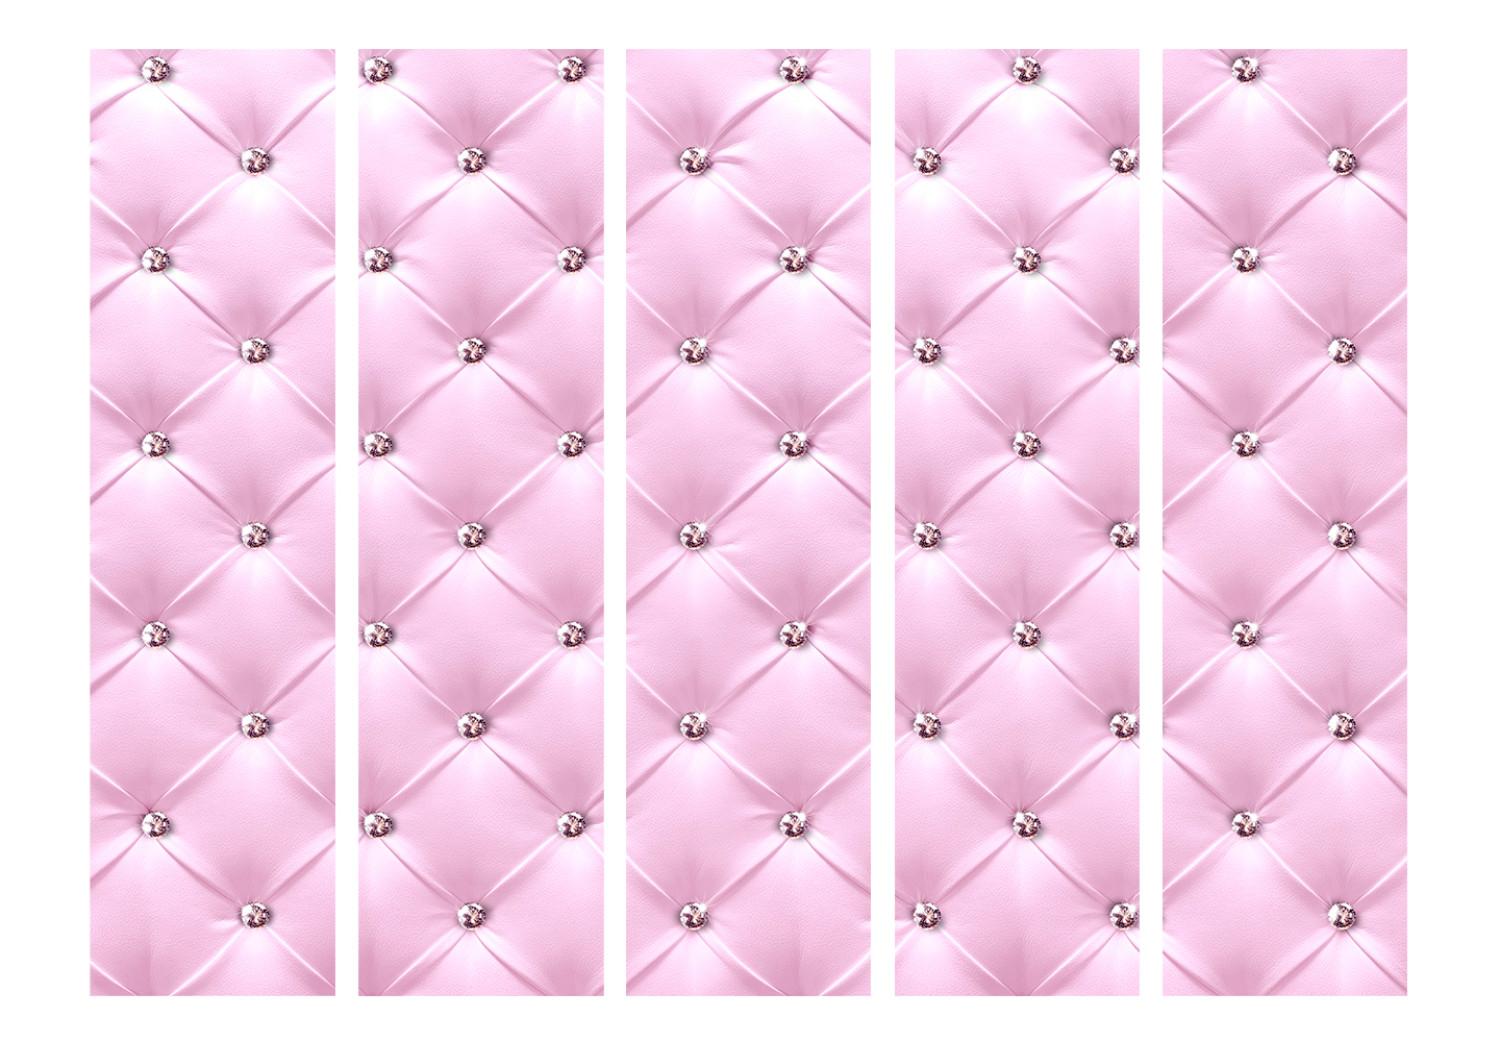 Room Divider Pink Lady II (5-piece) - composition adorned with small crystals